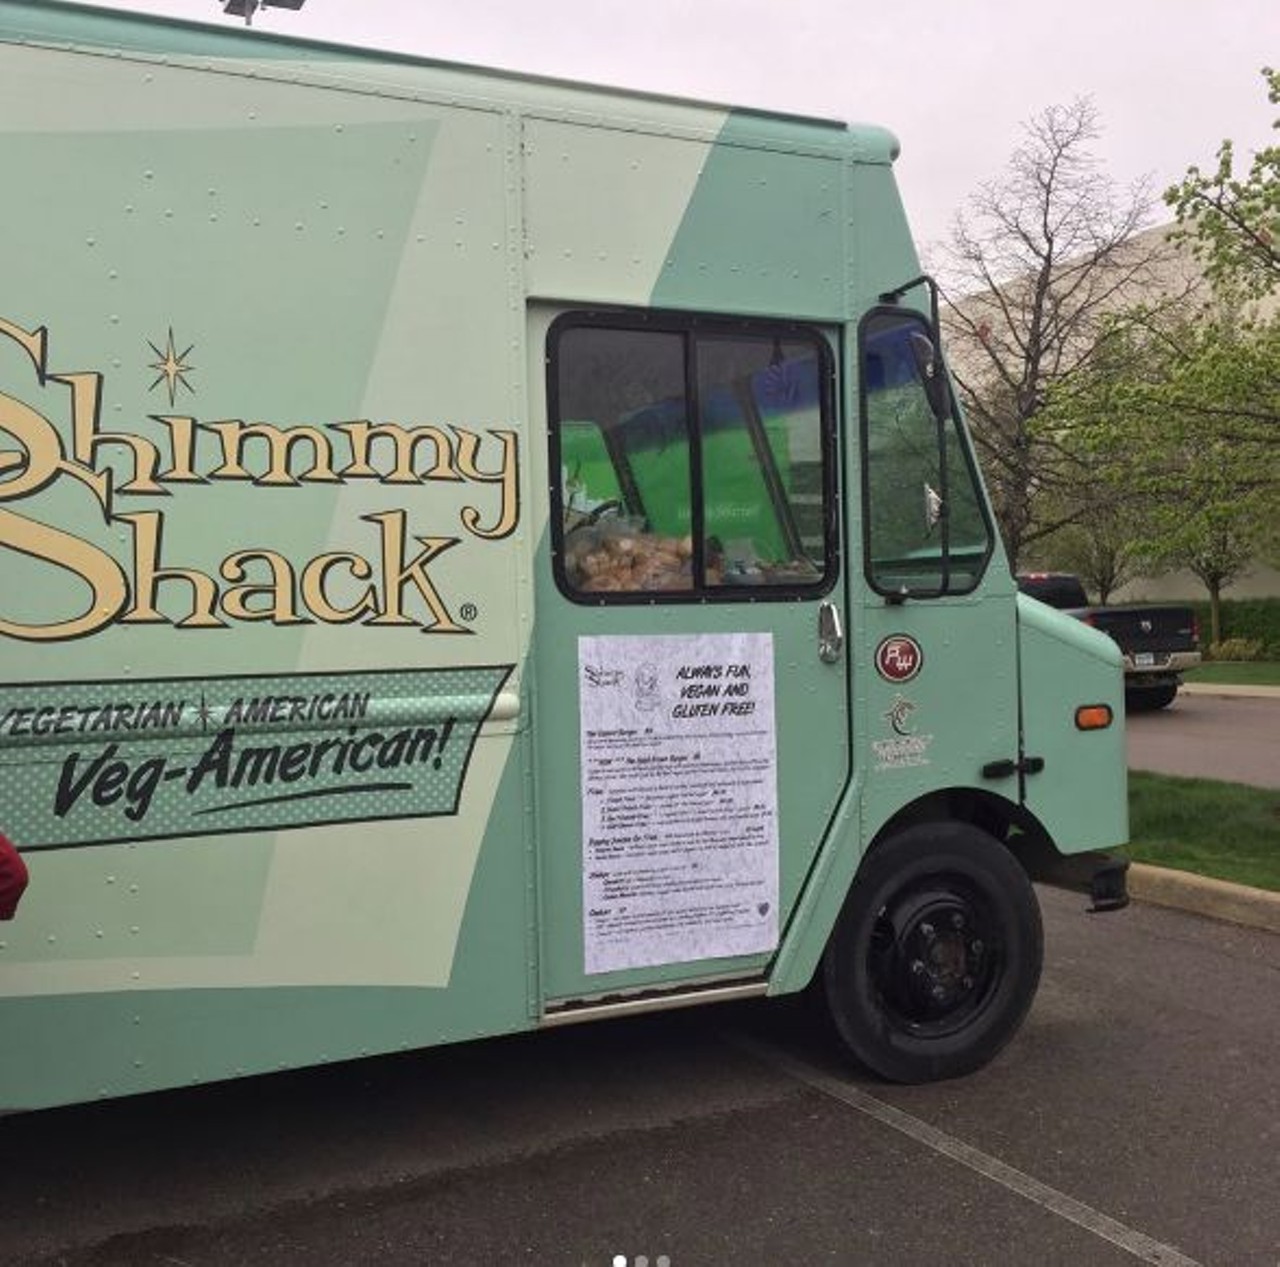 Shimmy Shack&nbsp;
This All-American slider joint is 100% vegan all the time and solid proof that vegan food is far from boring.&nbsp;
Photo via Instagram user @glutenfreeveggielife
